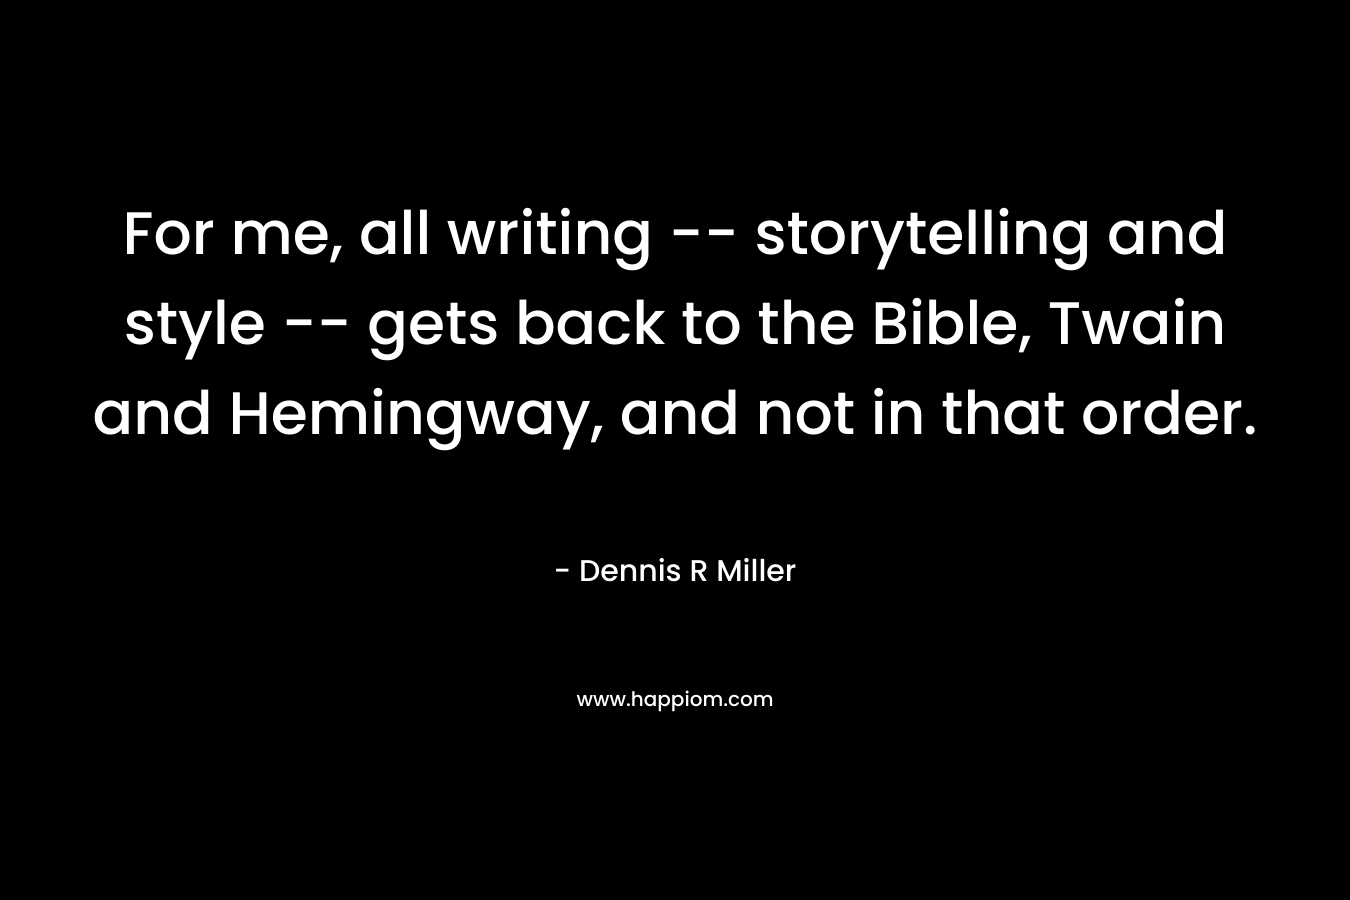 For me, all writing -- storytelling and style -- gets back to the Bible, Twain and Hemingway, and not in that order.